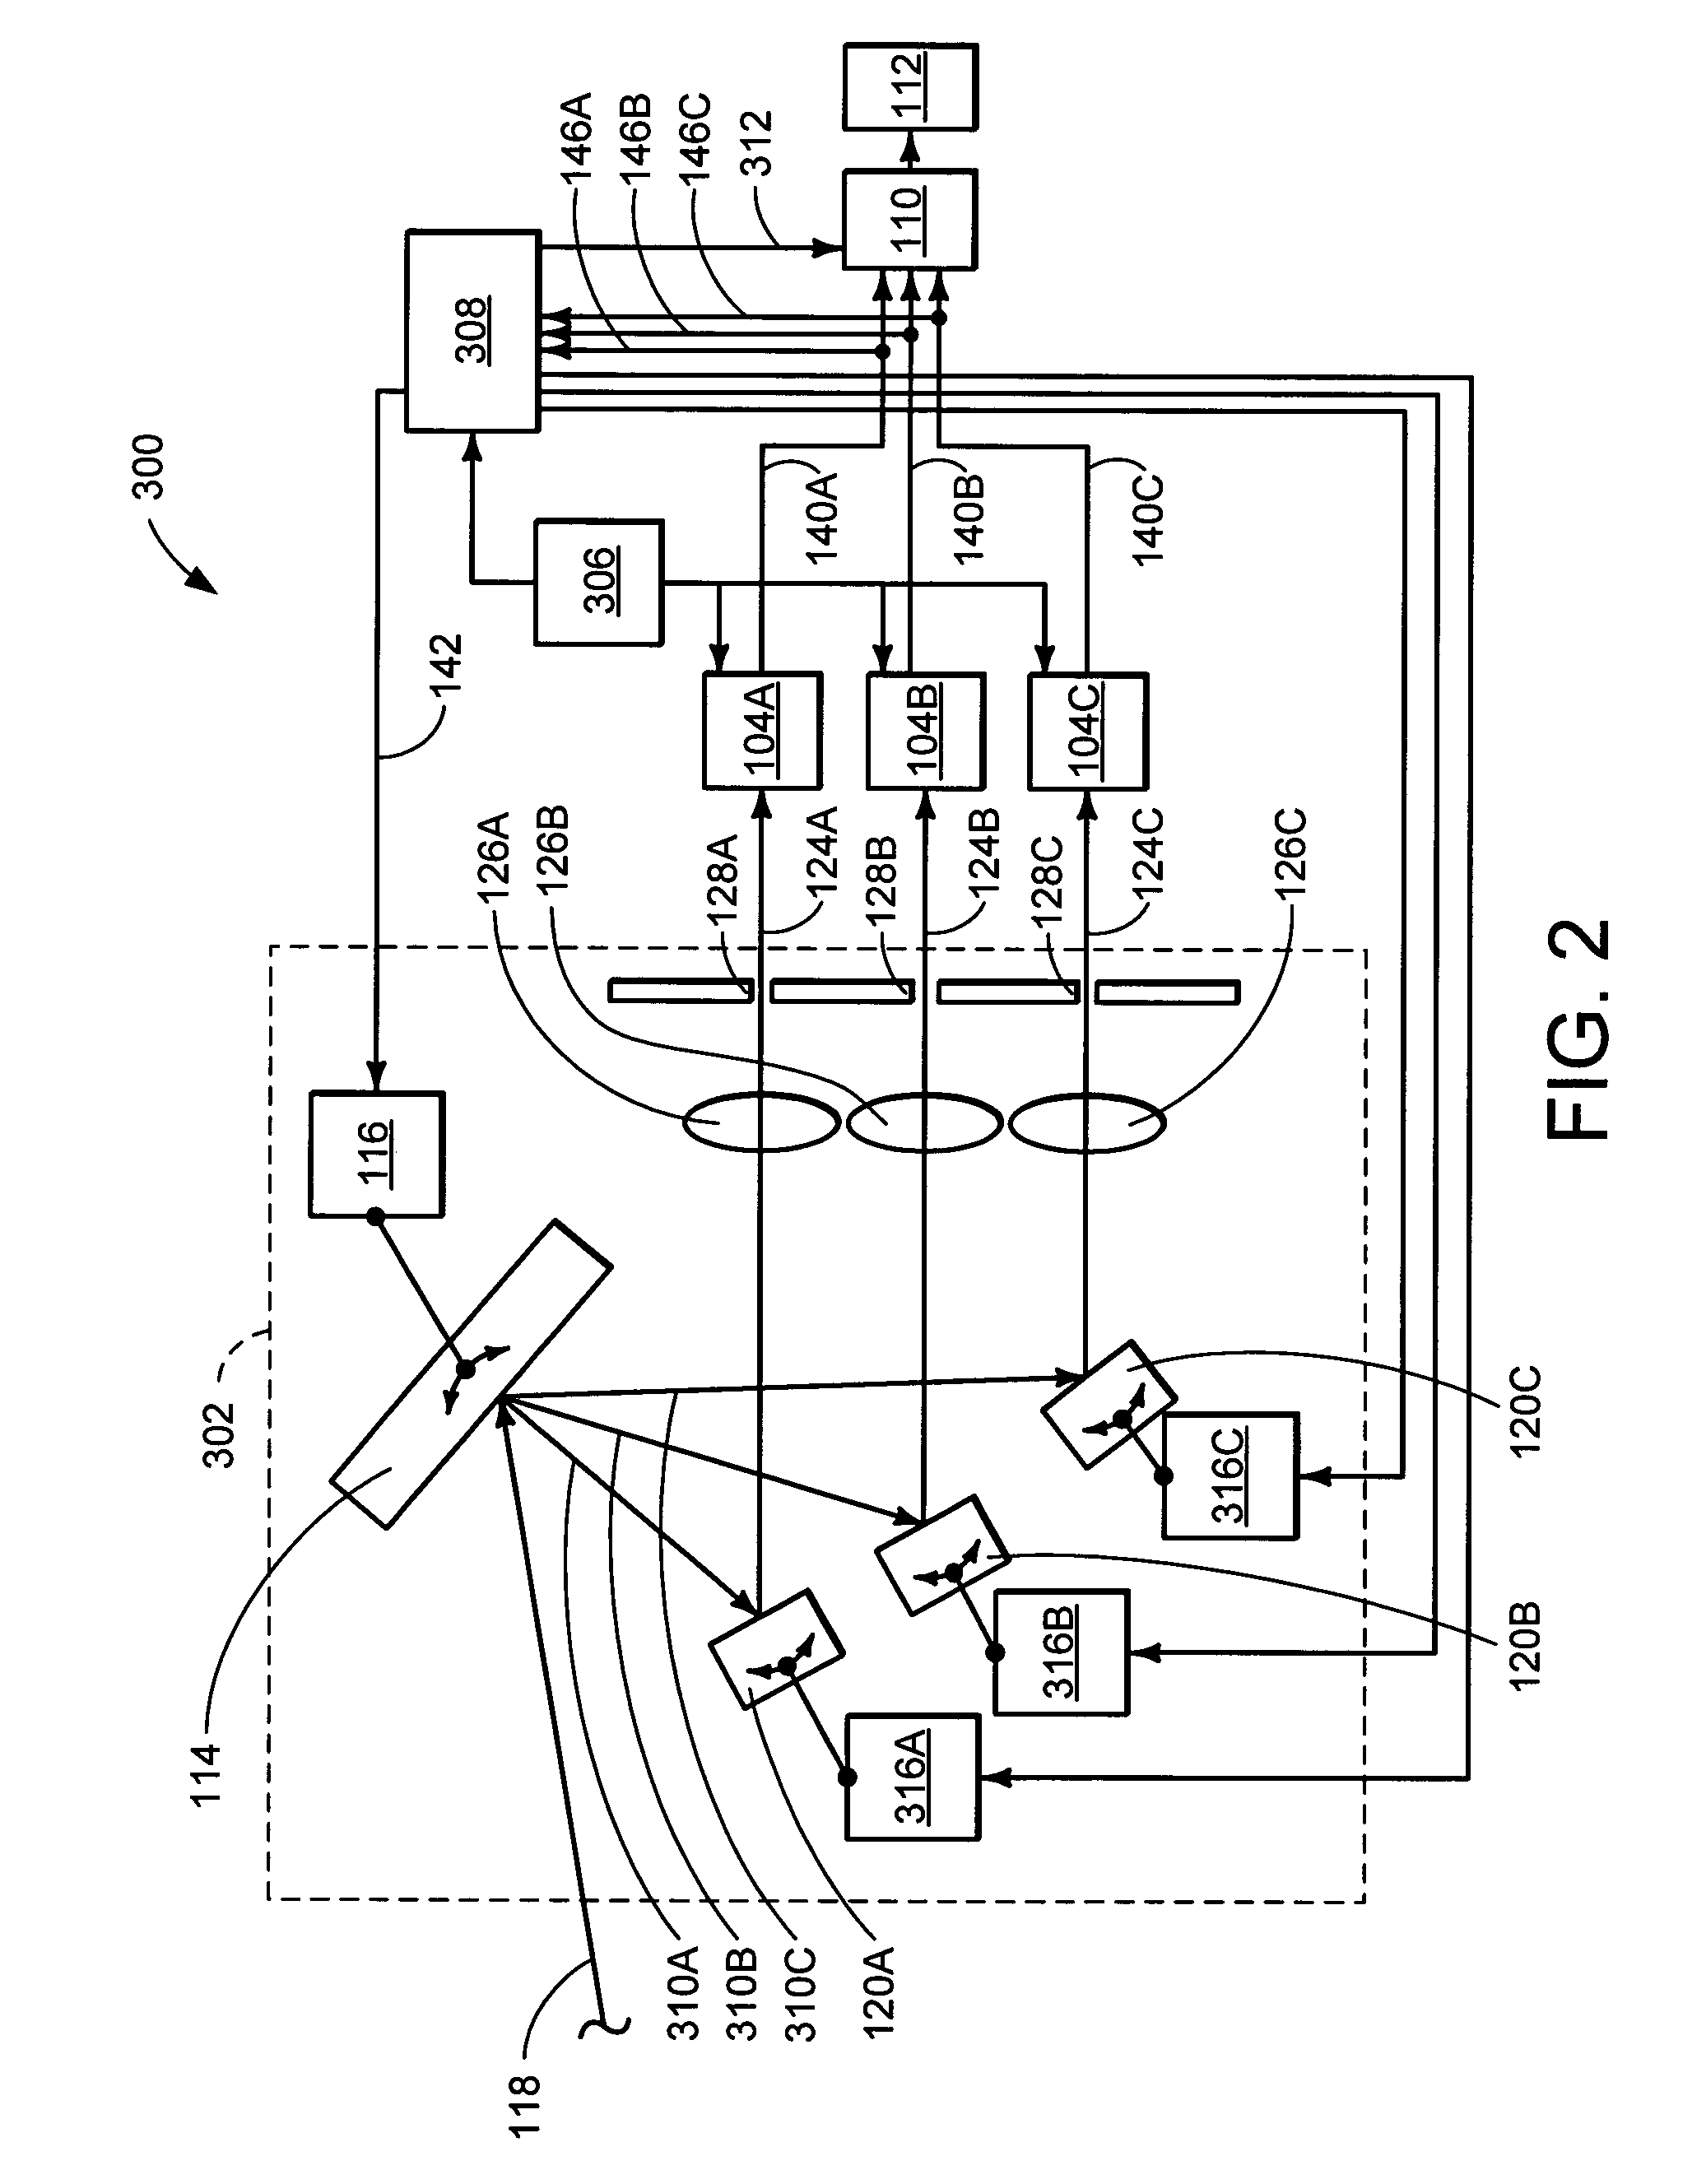 Method and apparatus for measuring waveforms and wavelengths of optical signals